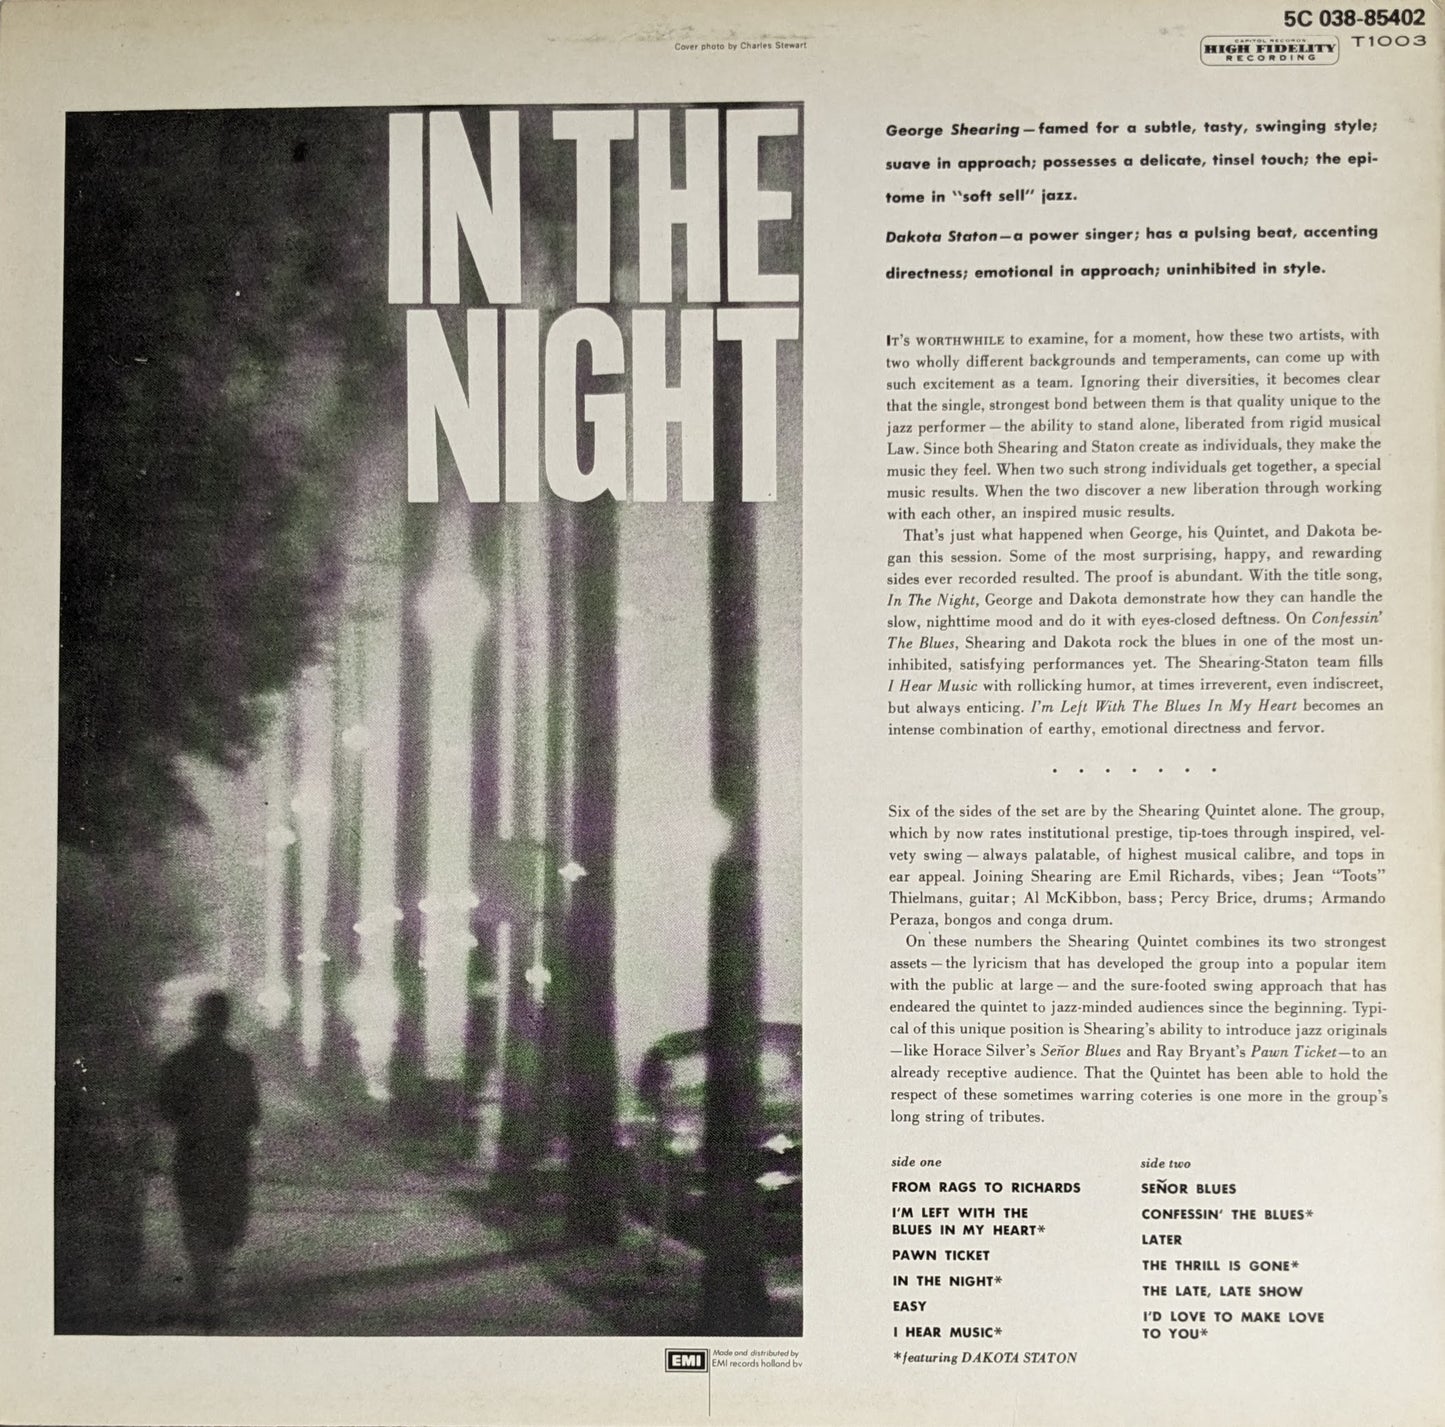 The George Shearing Quintet with Dakota Staton - In The Night